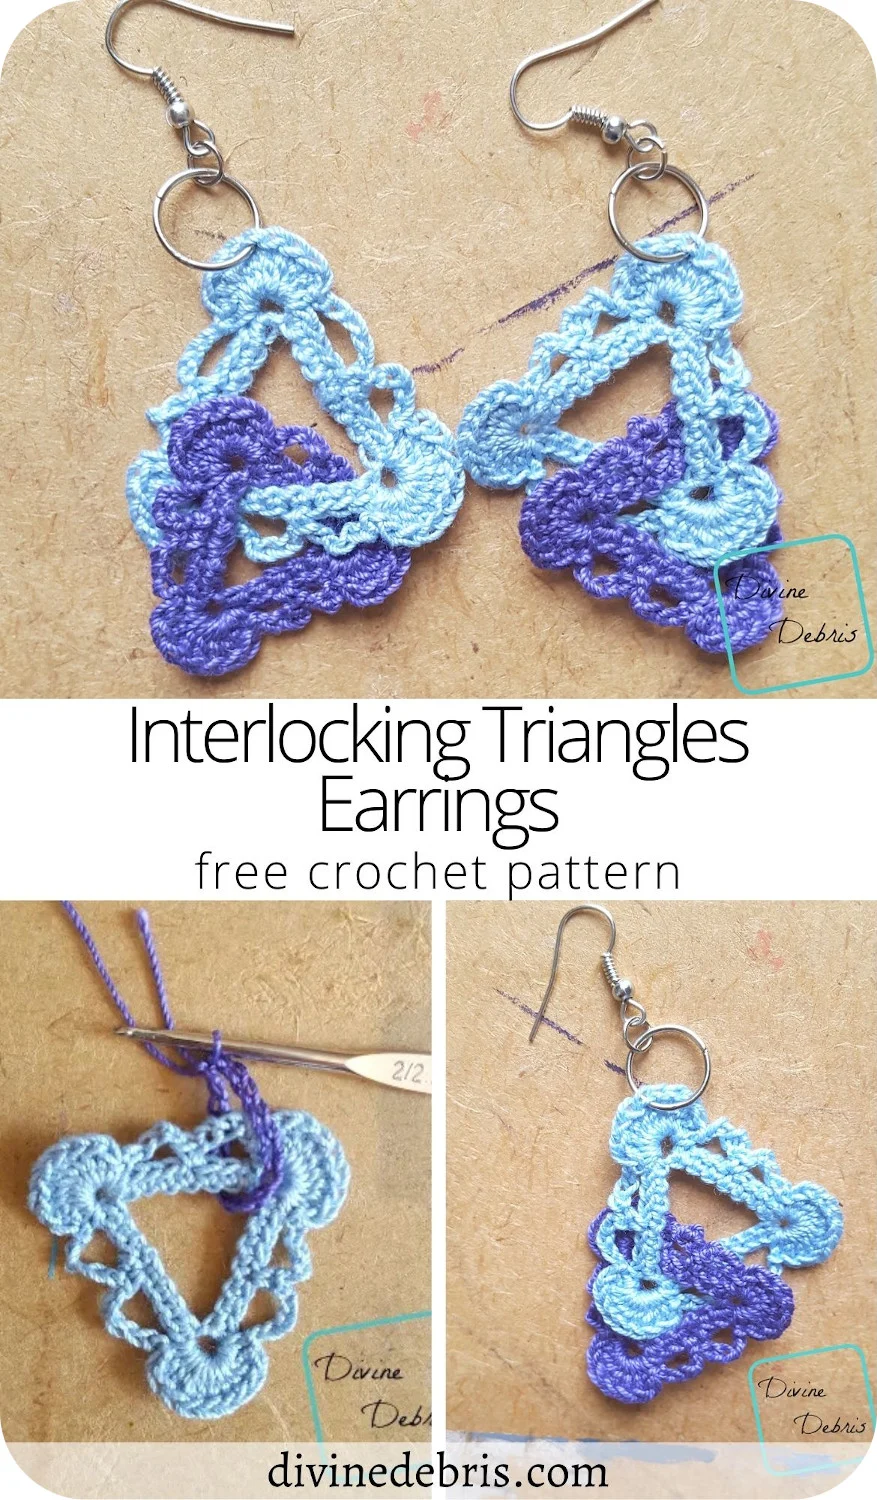 Make a quick gift, a treat for yourself, or get creative when you learn to make the Interlocking Triangles Earrings free crochet pattern on DivineDebris.com